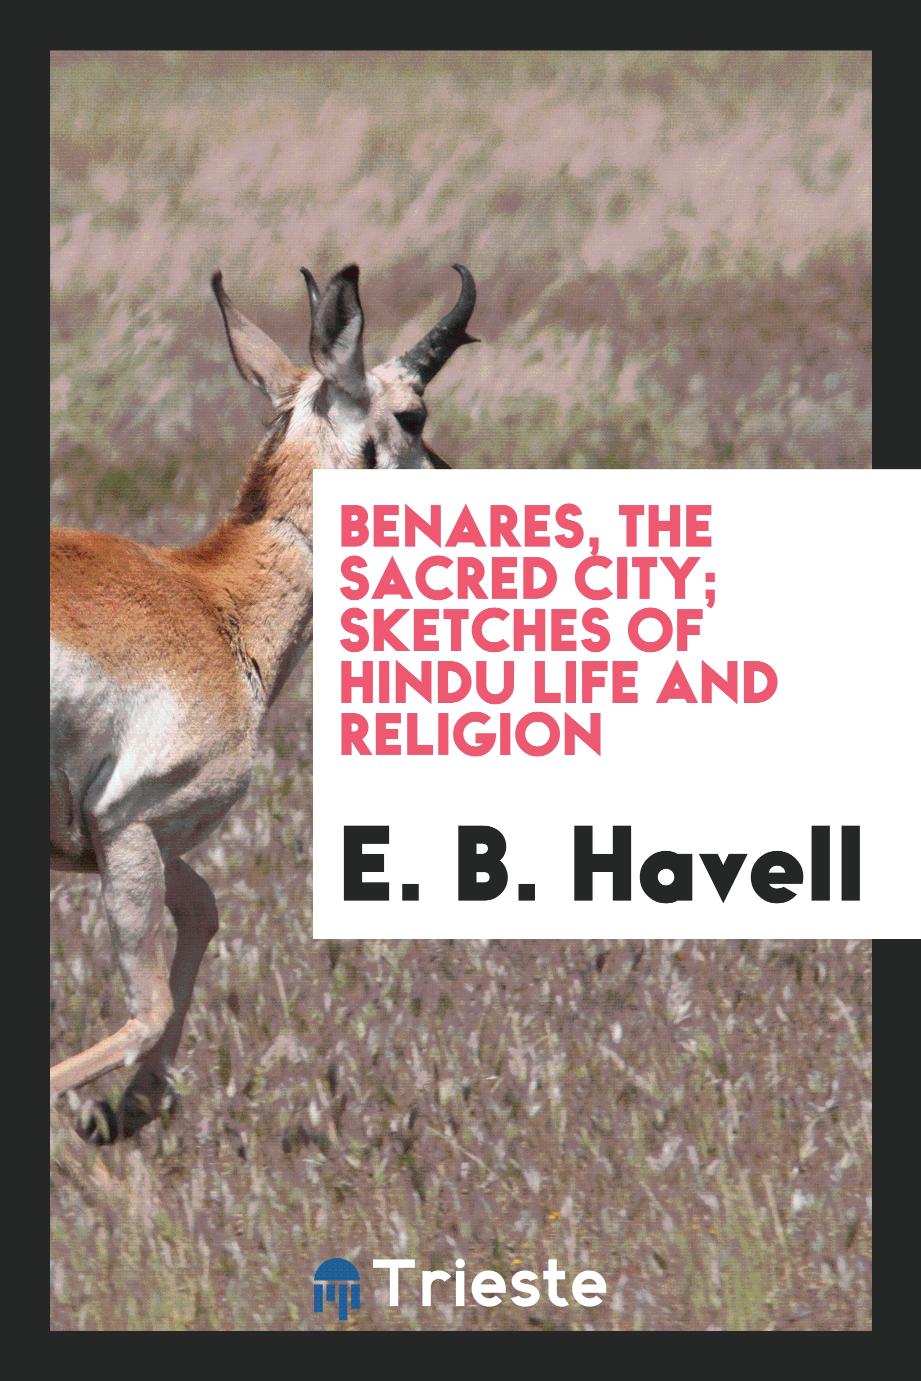 Benares, the sacred city; sketches of Hindu life and religion